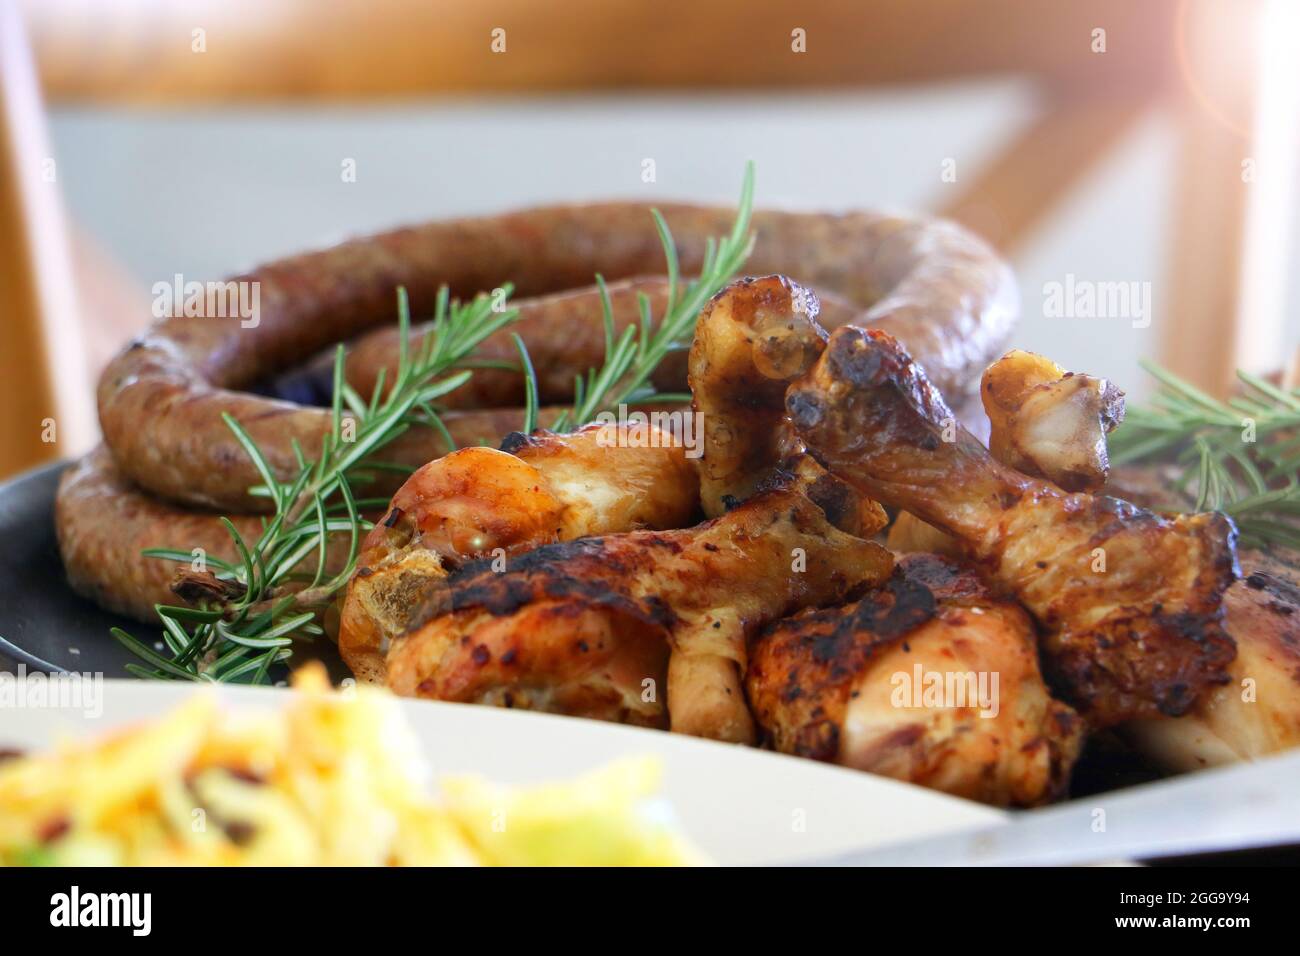 barbeque braai meat chicken and boerewors on plates ready to eat with salad and corn Stock Photo